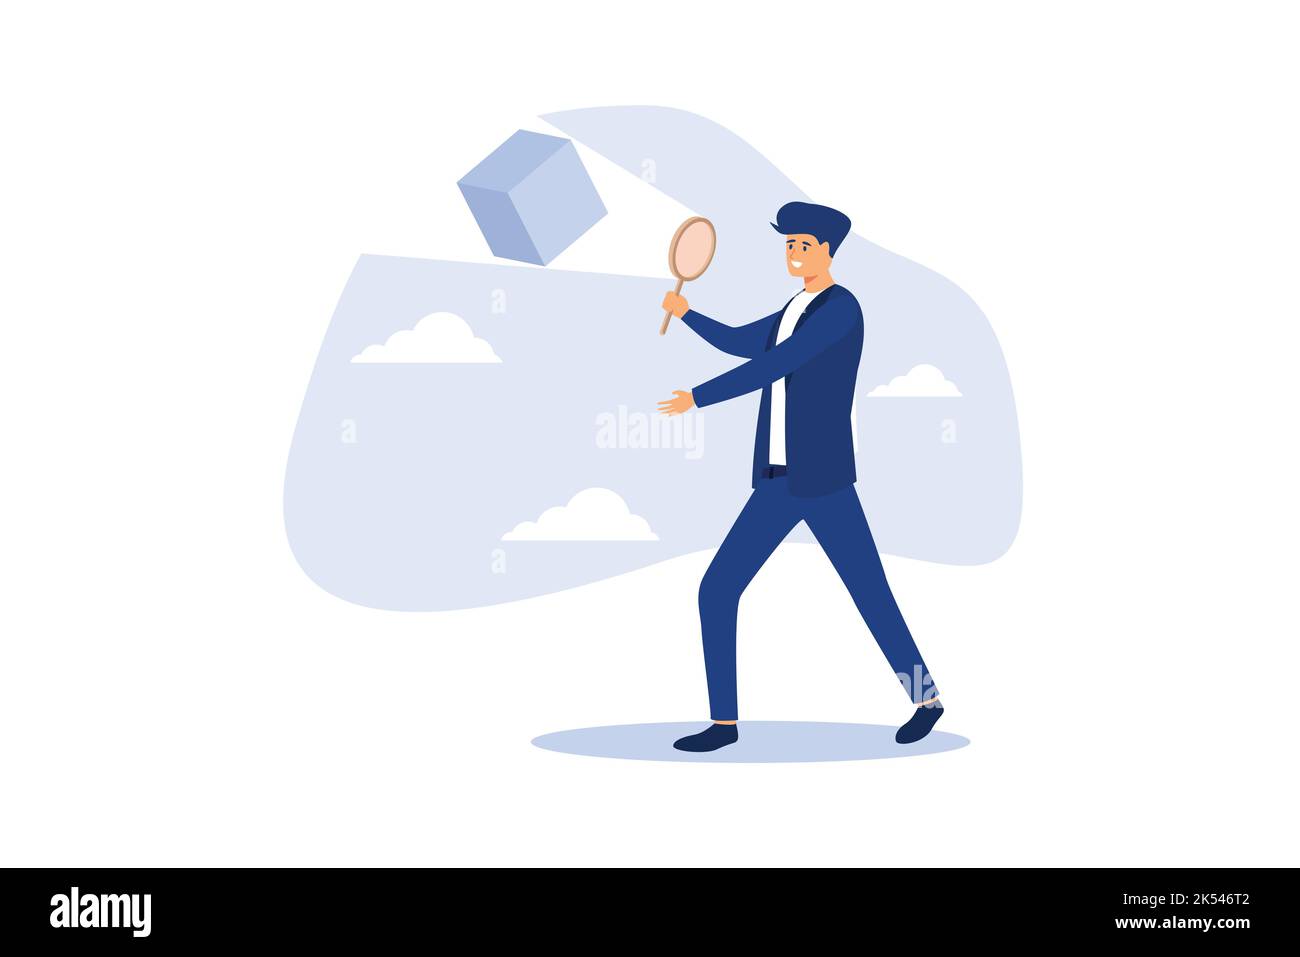 Business case study or marketing research, analyze product prototype or competitor, learning or search for strong and weakness concept, smart business Stock Vector